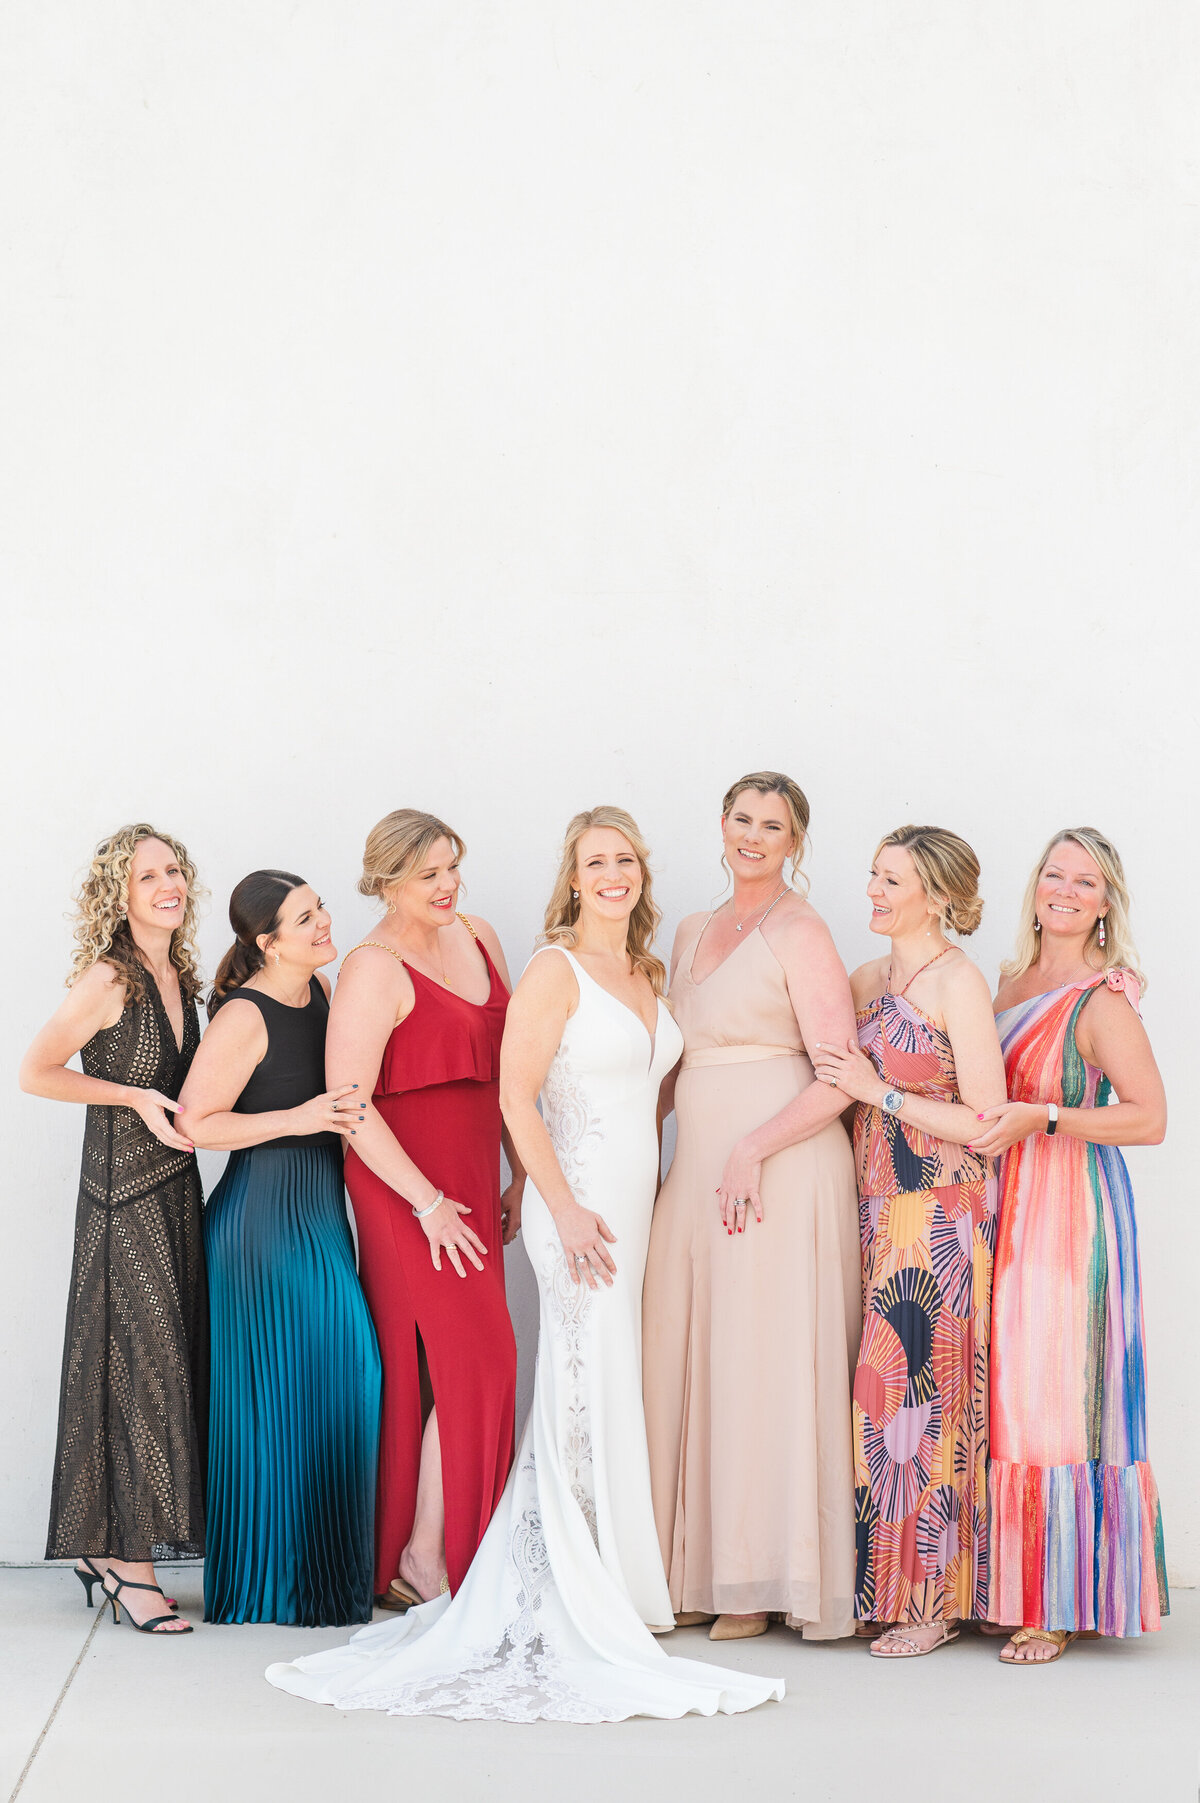 Group photograph of bride and bridesmaids in colorful dresses in front of a white background in Buena Vista.